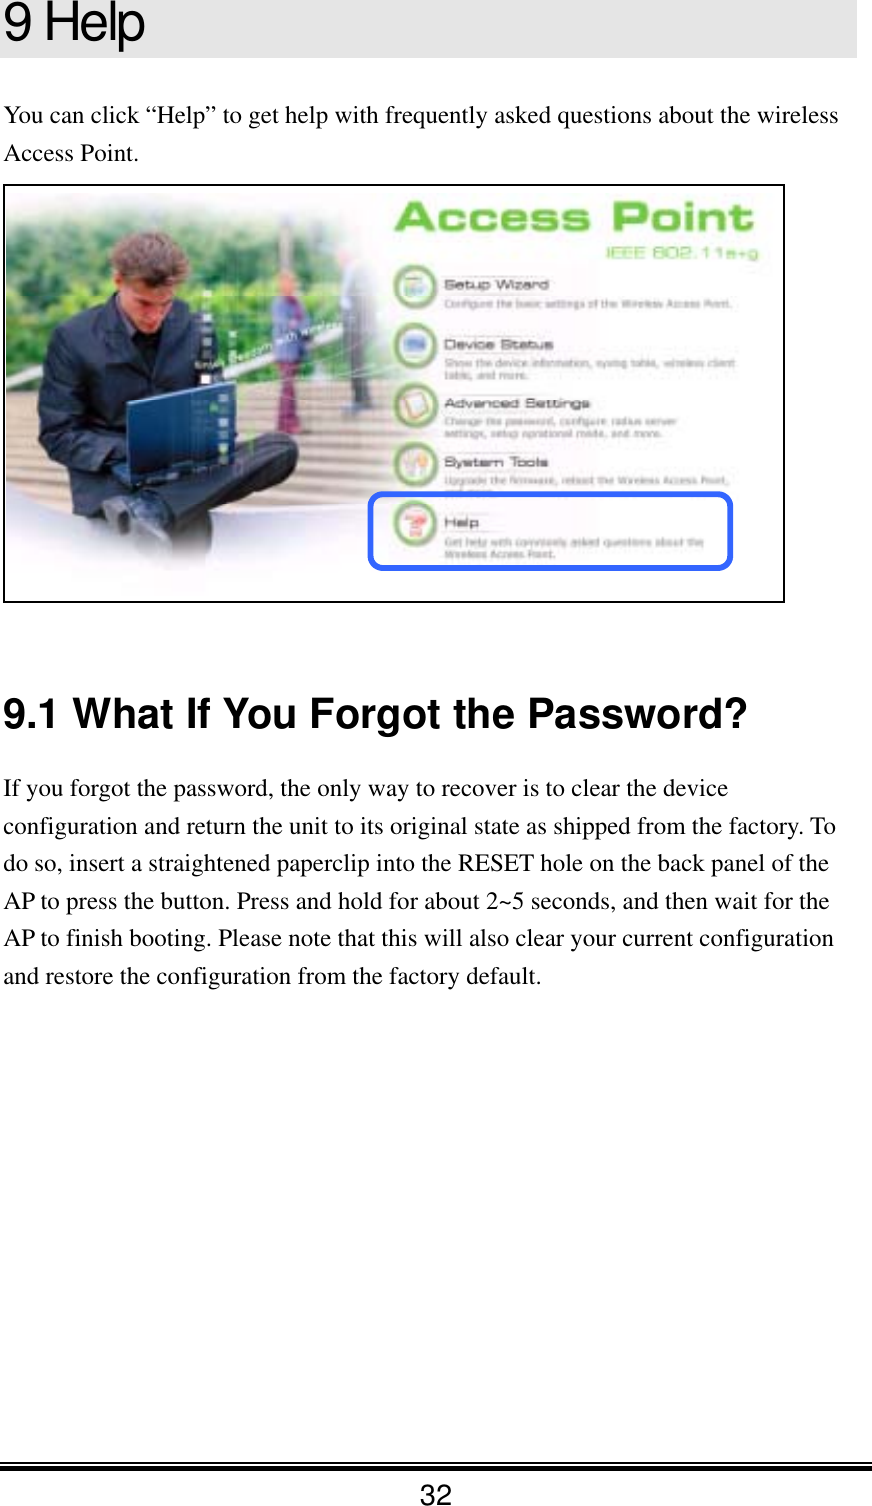 32 9 Help You can click “Help” to get help with frequently asked questions about the wireless Access Point.    9.1 What If You Forgot the Password? If you forgot the password, the only way to recover is to clear the device configuration and return the unit to its original state as shipped from the factory. To do so, insert a straightened paperclip into the RESET hole on the back panel of the AP to press the button. Press and hold for about 2~5 seconds, and then wait for the AP to finish booting. Please note that this will also clear your current configuration and restore the configuration from the factory default.    